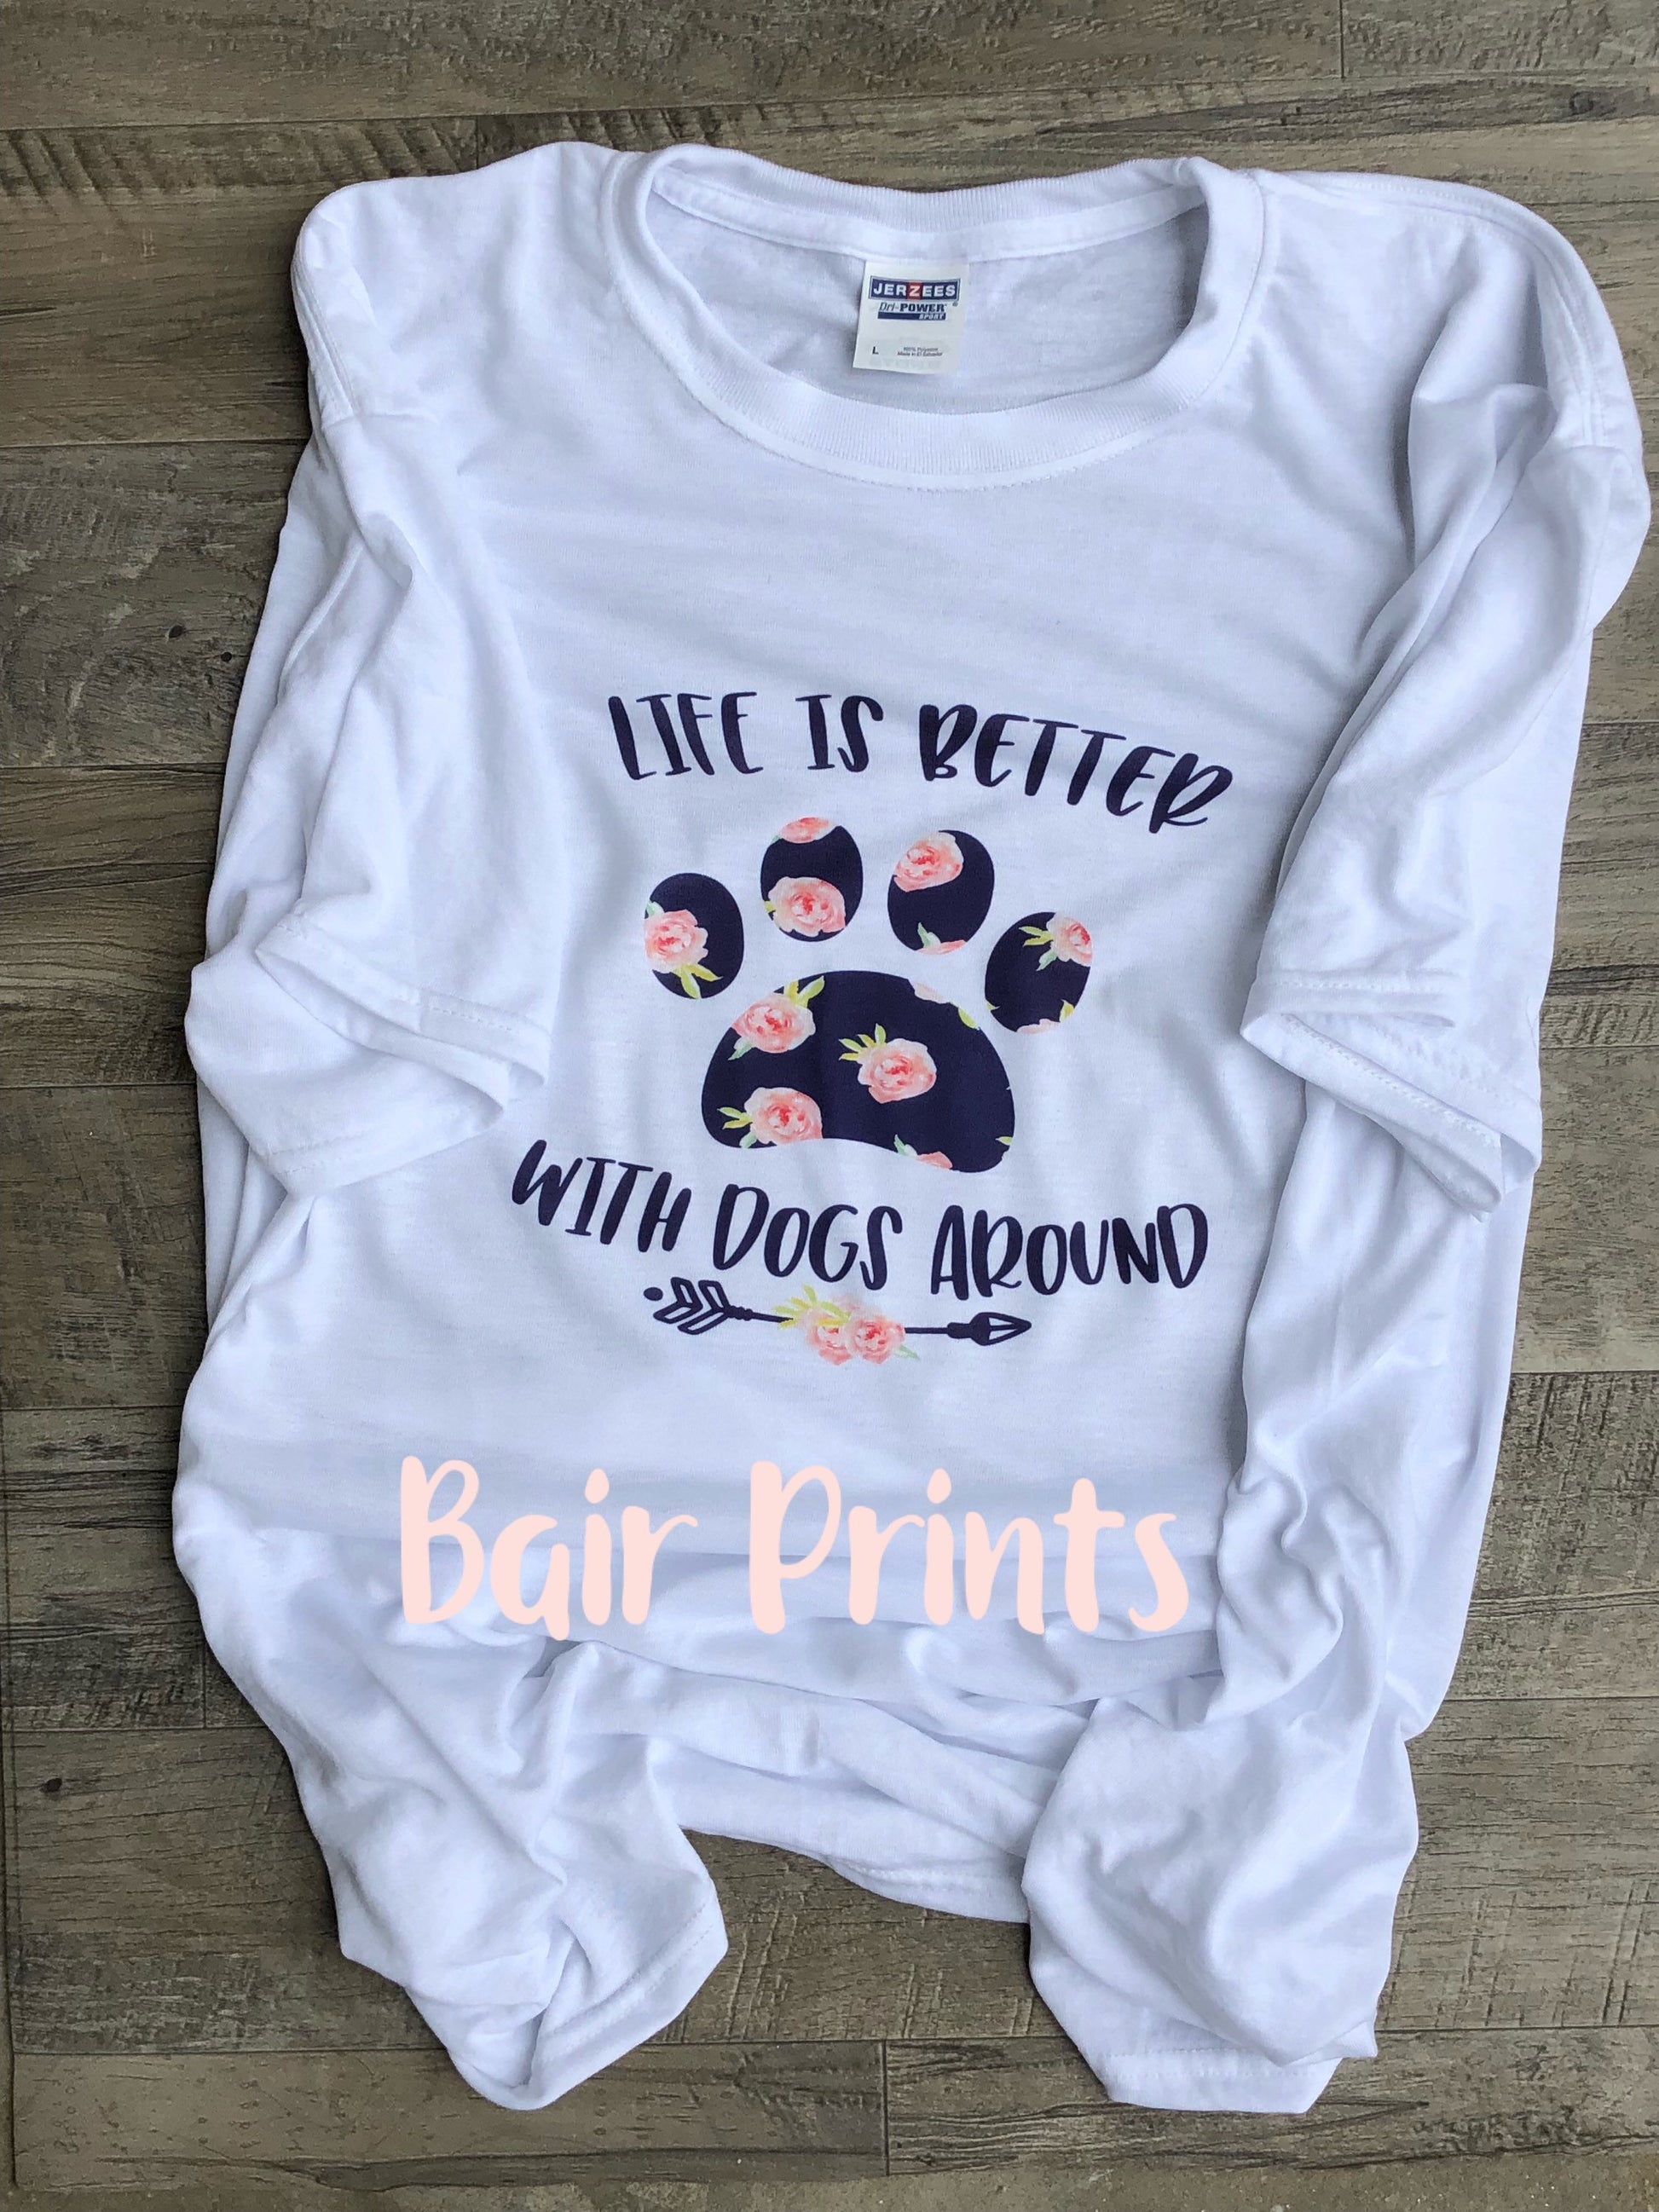 Life is Better with Dogs Shirt. Ladies floral dog shirt. Gift for a new pet owner. Plus Size Dog Lover Shirt - Bair Prints